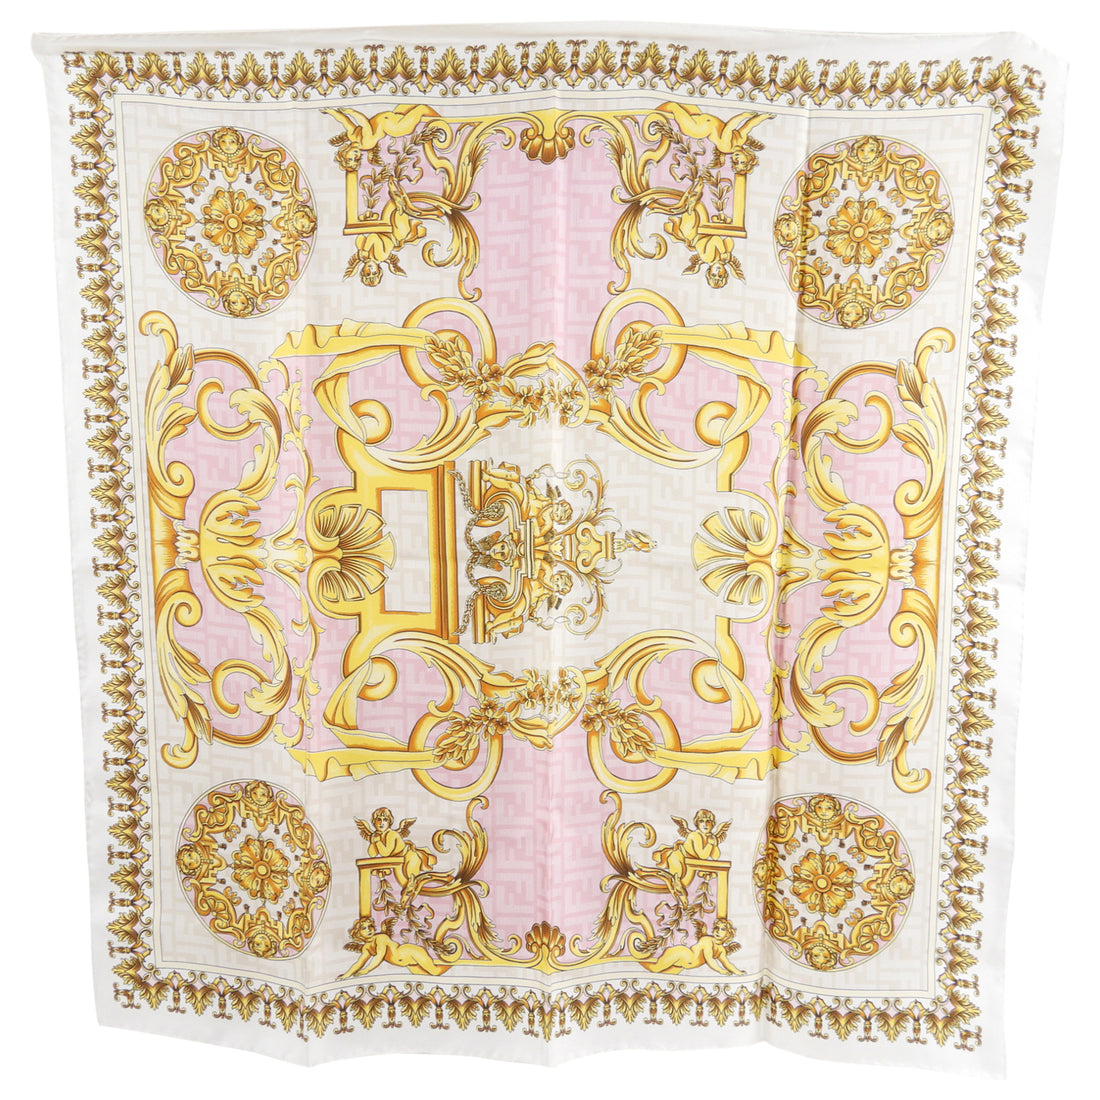 Fendace Fendi x Versace Limited Edition Pink White Silk Scarf – I MISS YOU  VINTAGE